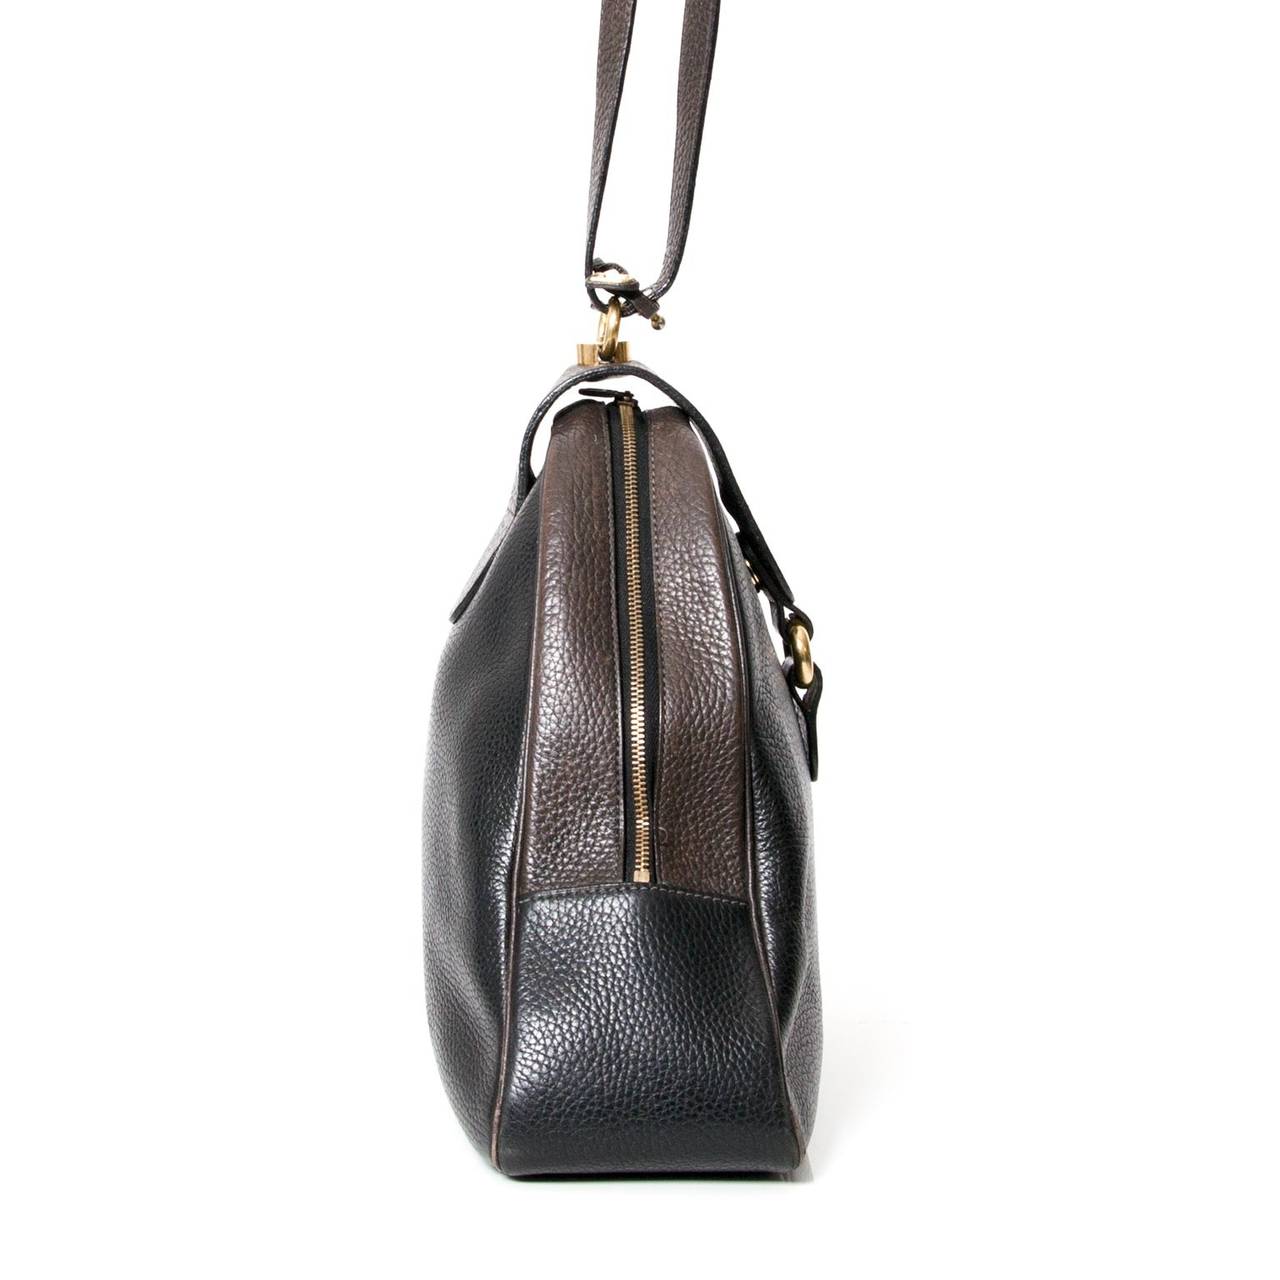 A very original and stylisjh Delvaux shoulder bag in black and dark brown wide grained calfskin. With pale gold-tone hardware with a single shoulder strap at the top. Interior suede lining.